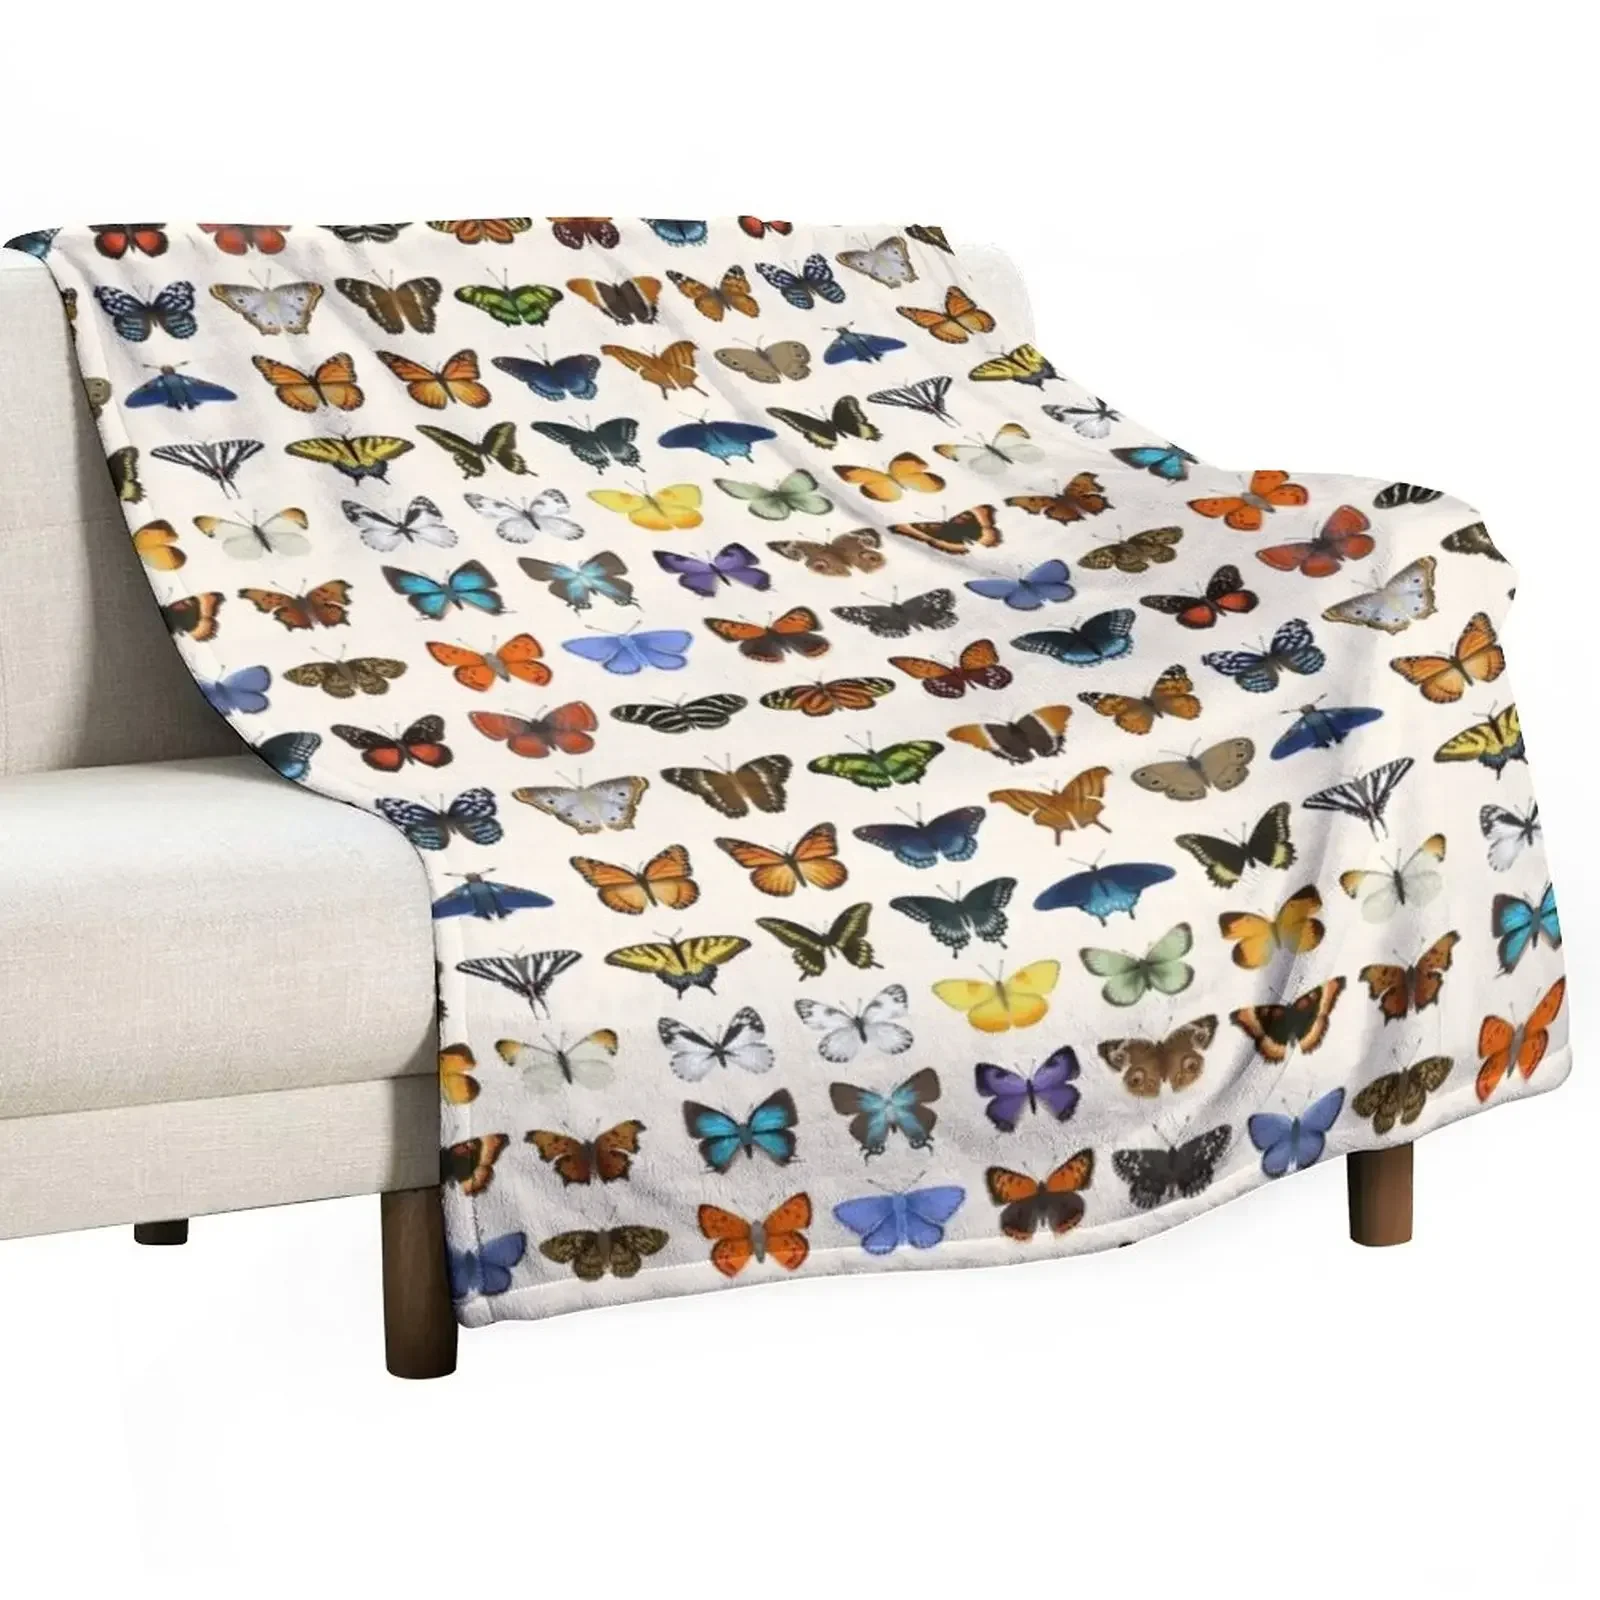 

Butterflies of North America Throw Blanket Heavy Baby Sofa Quilt Blankets